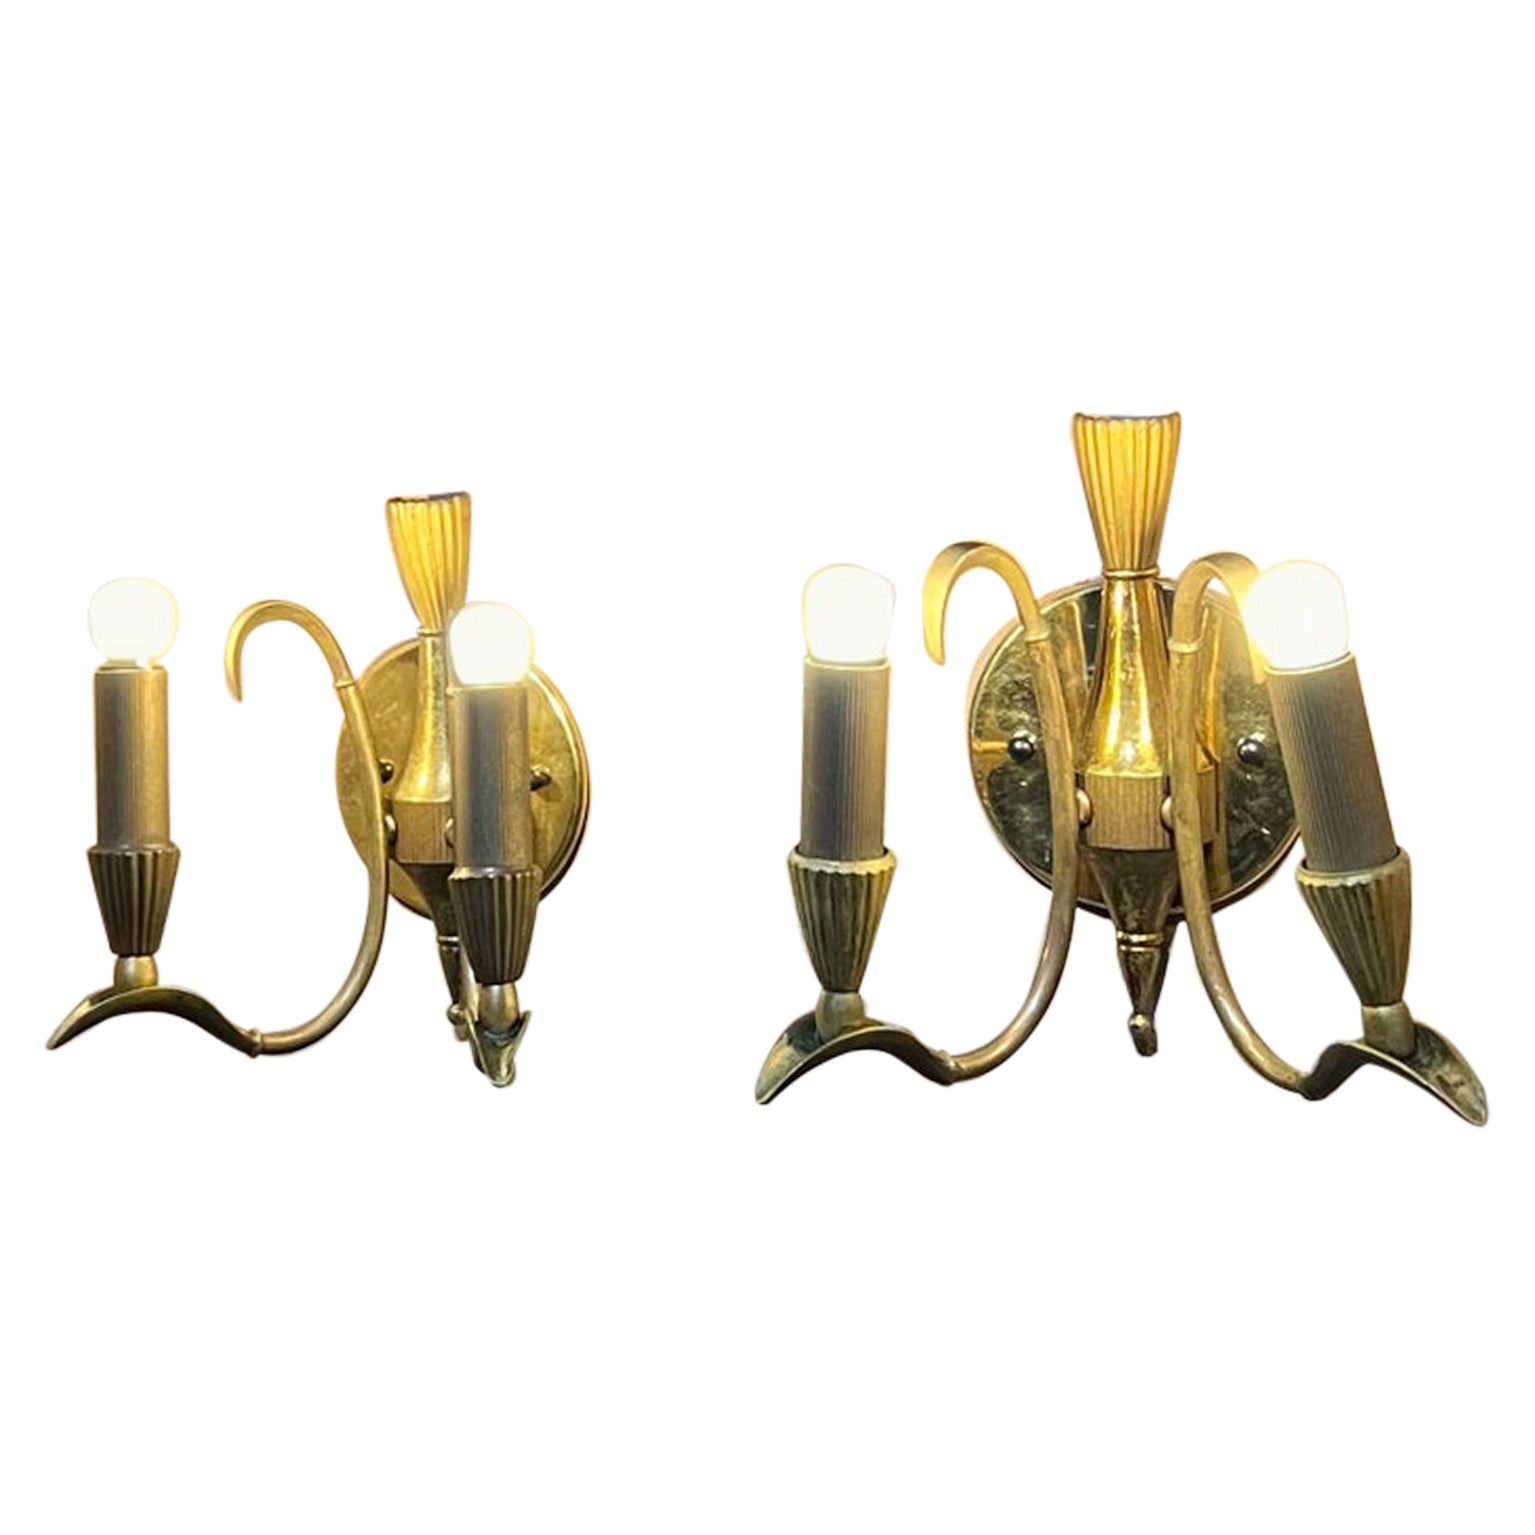 1950s Neoclassical Italian Wall Sconce Pair Sculptural Double Arm from Italy For Sale